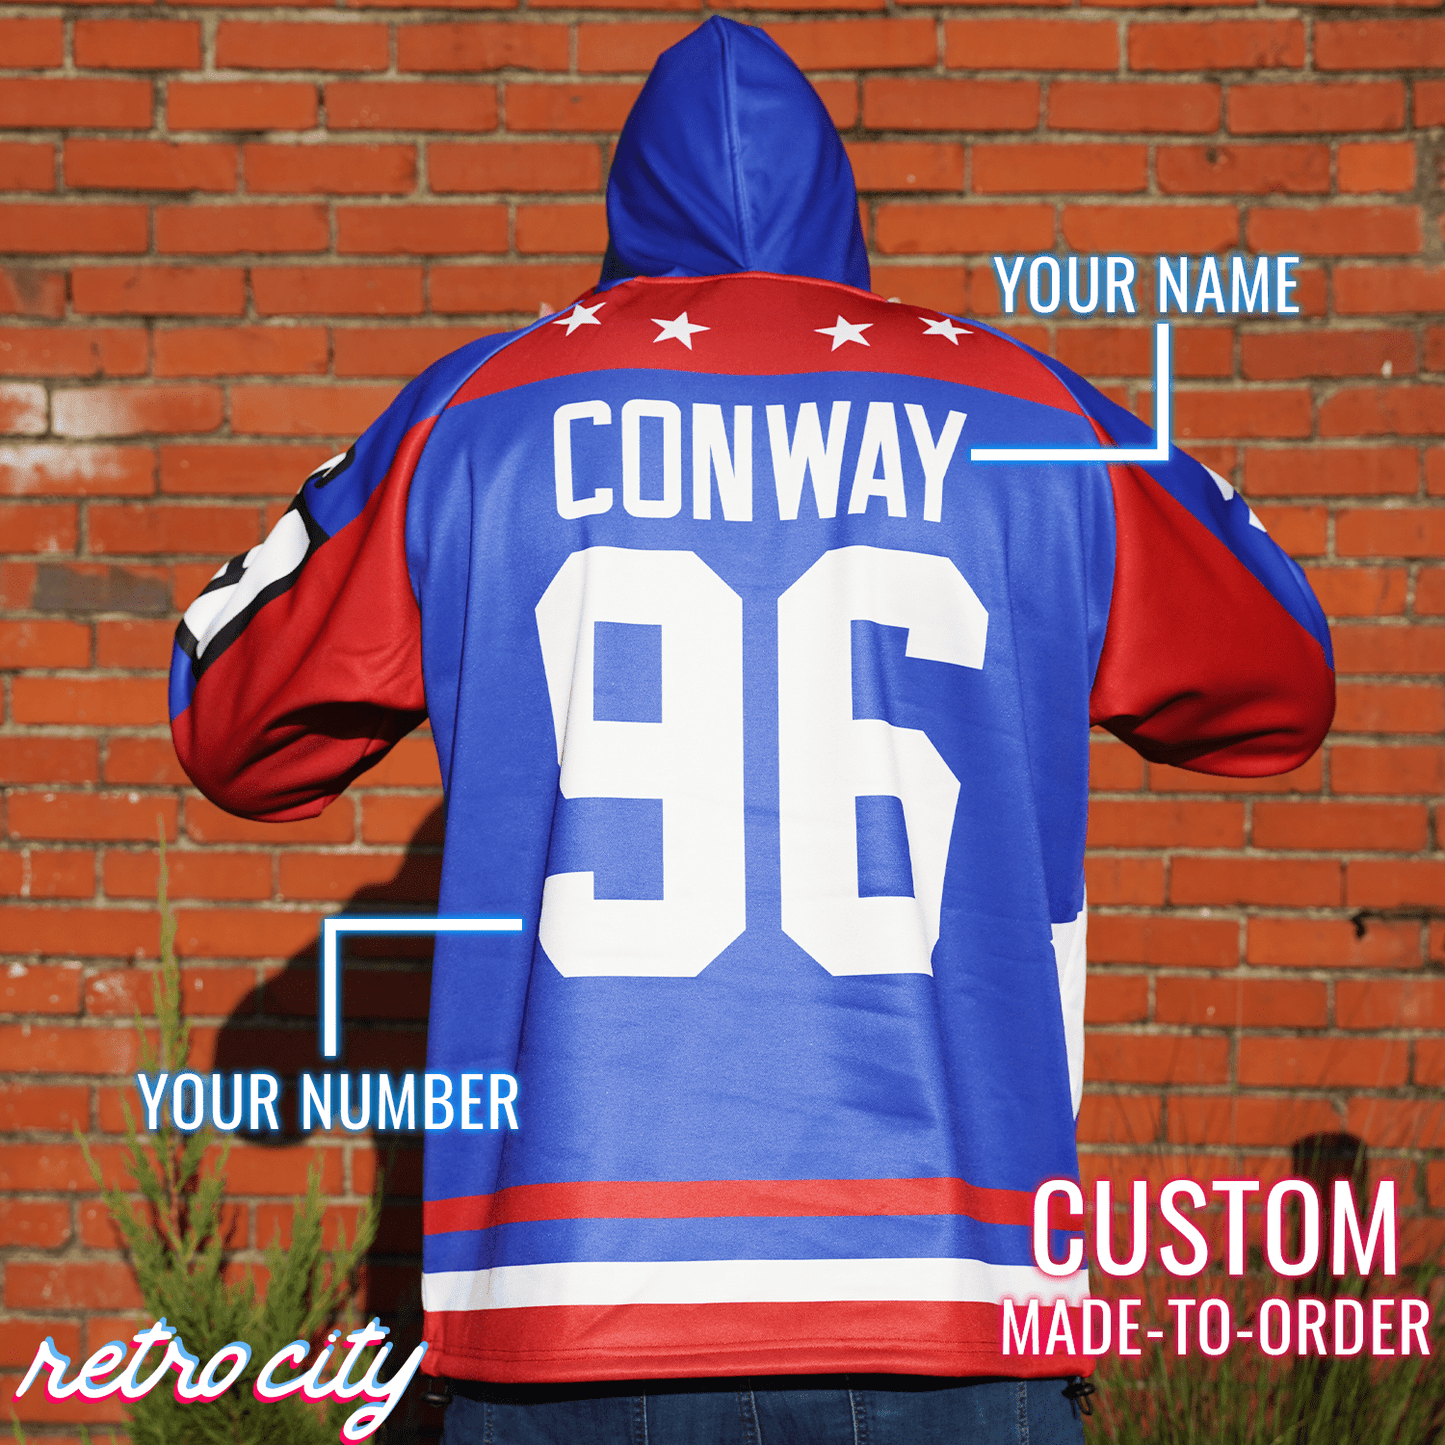 Hockey Lace up Sweater Hoodie Customize Colors and Team 